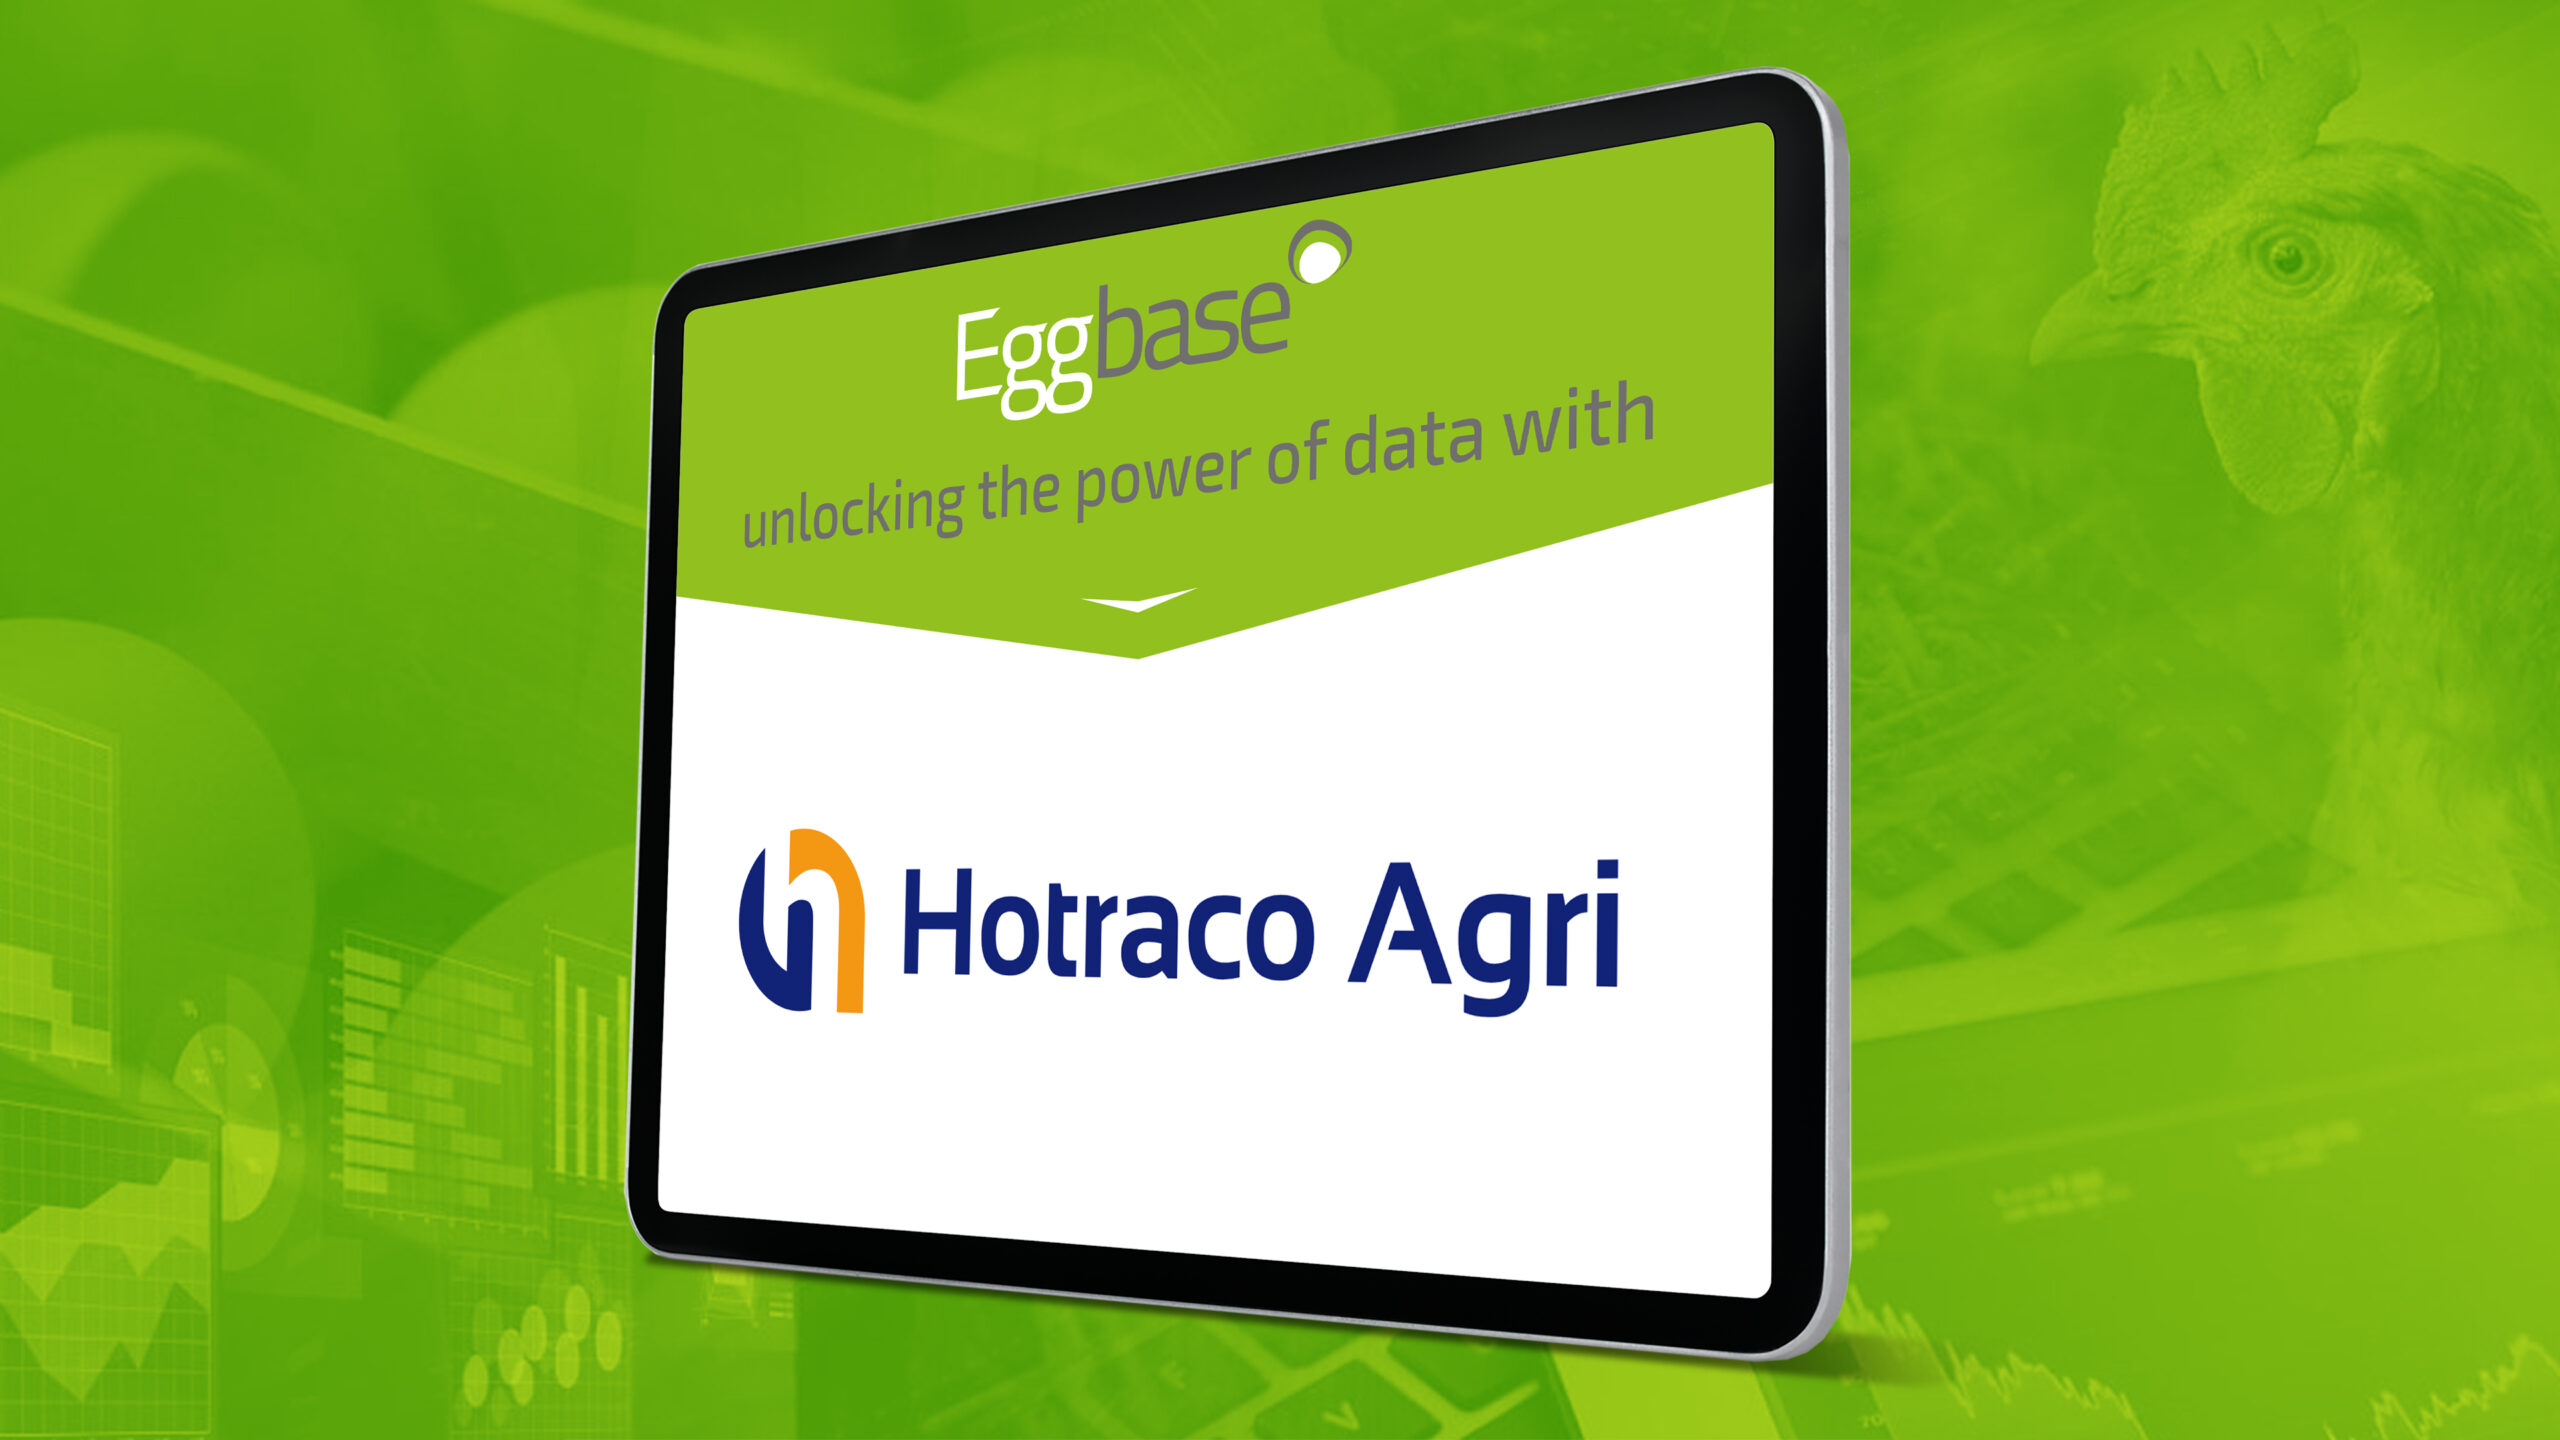 Eggbase Announce Seamless Integration With Hotraco Agri BV to Bring Data Into the Eggsense Platform